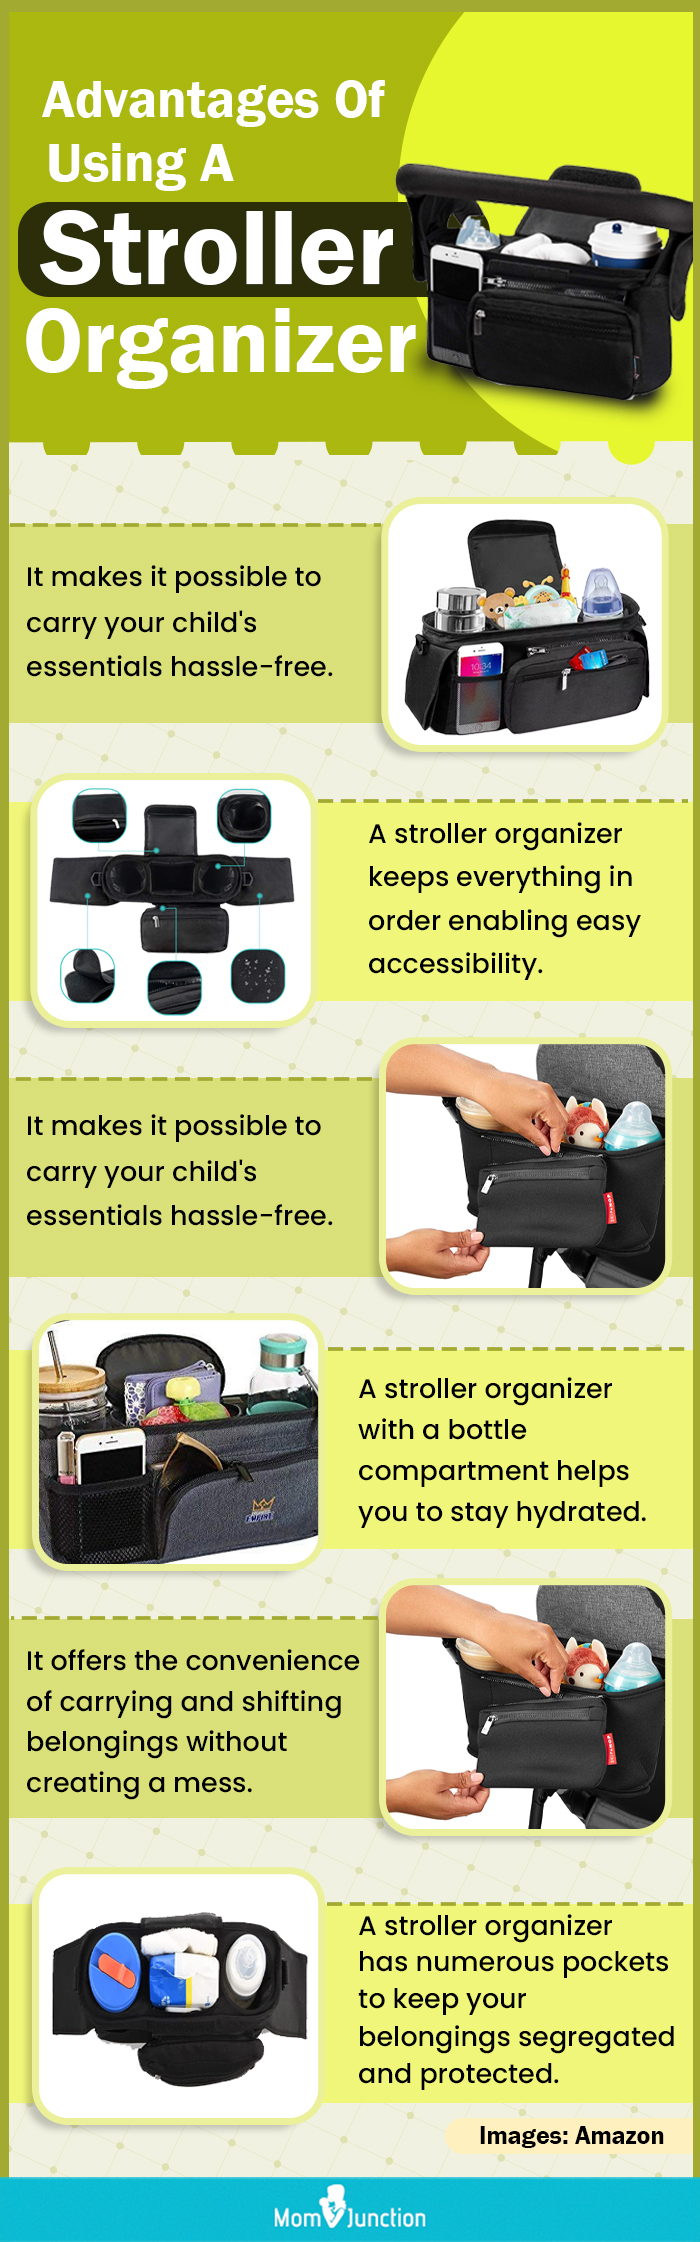 Advantages Of Using A Stroller Organizer (infographic)